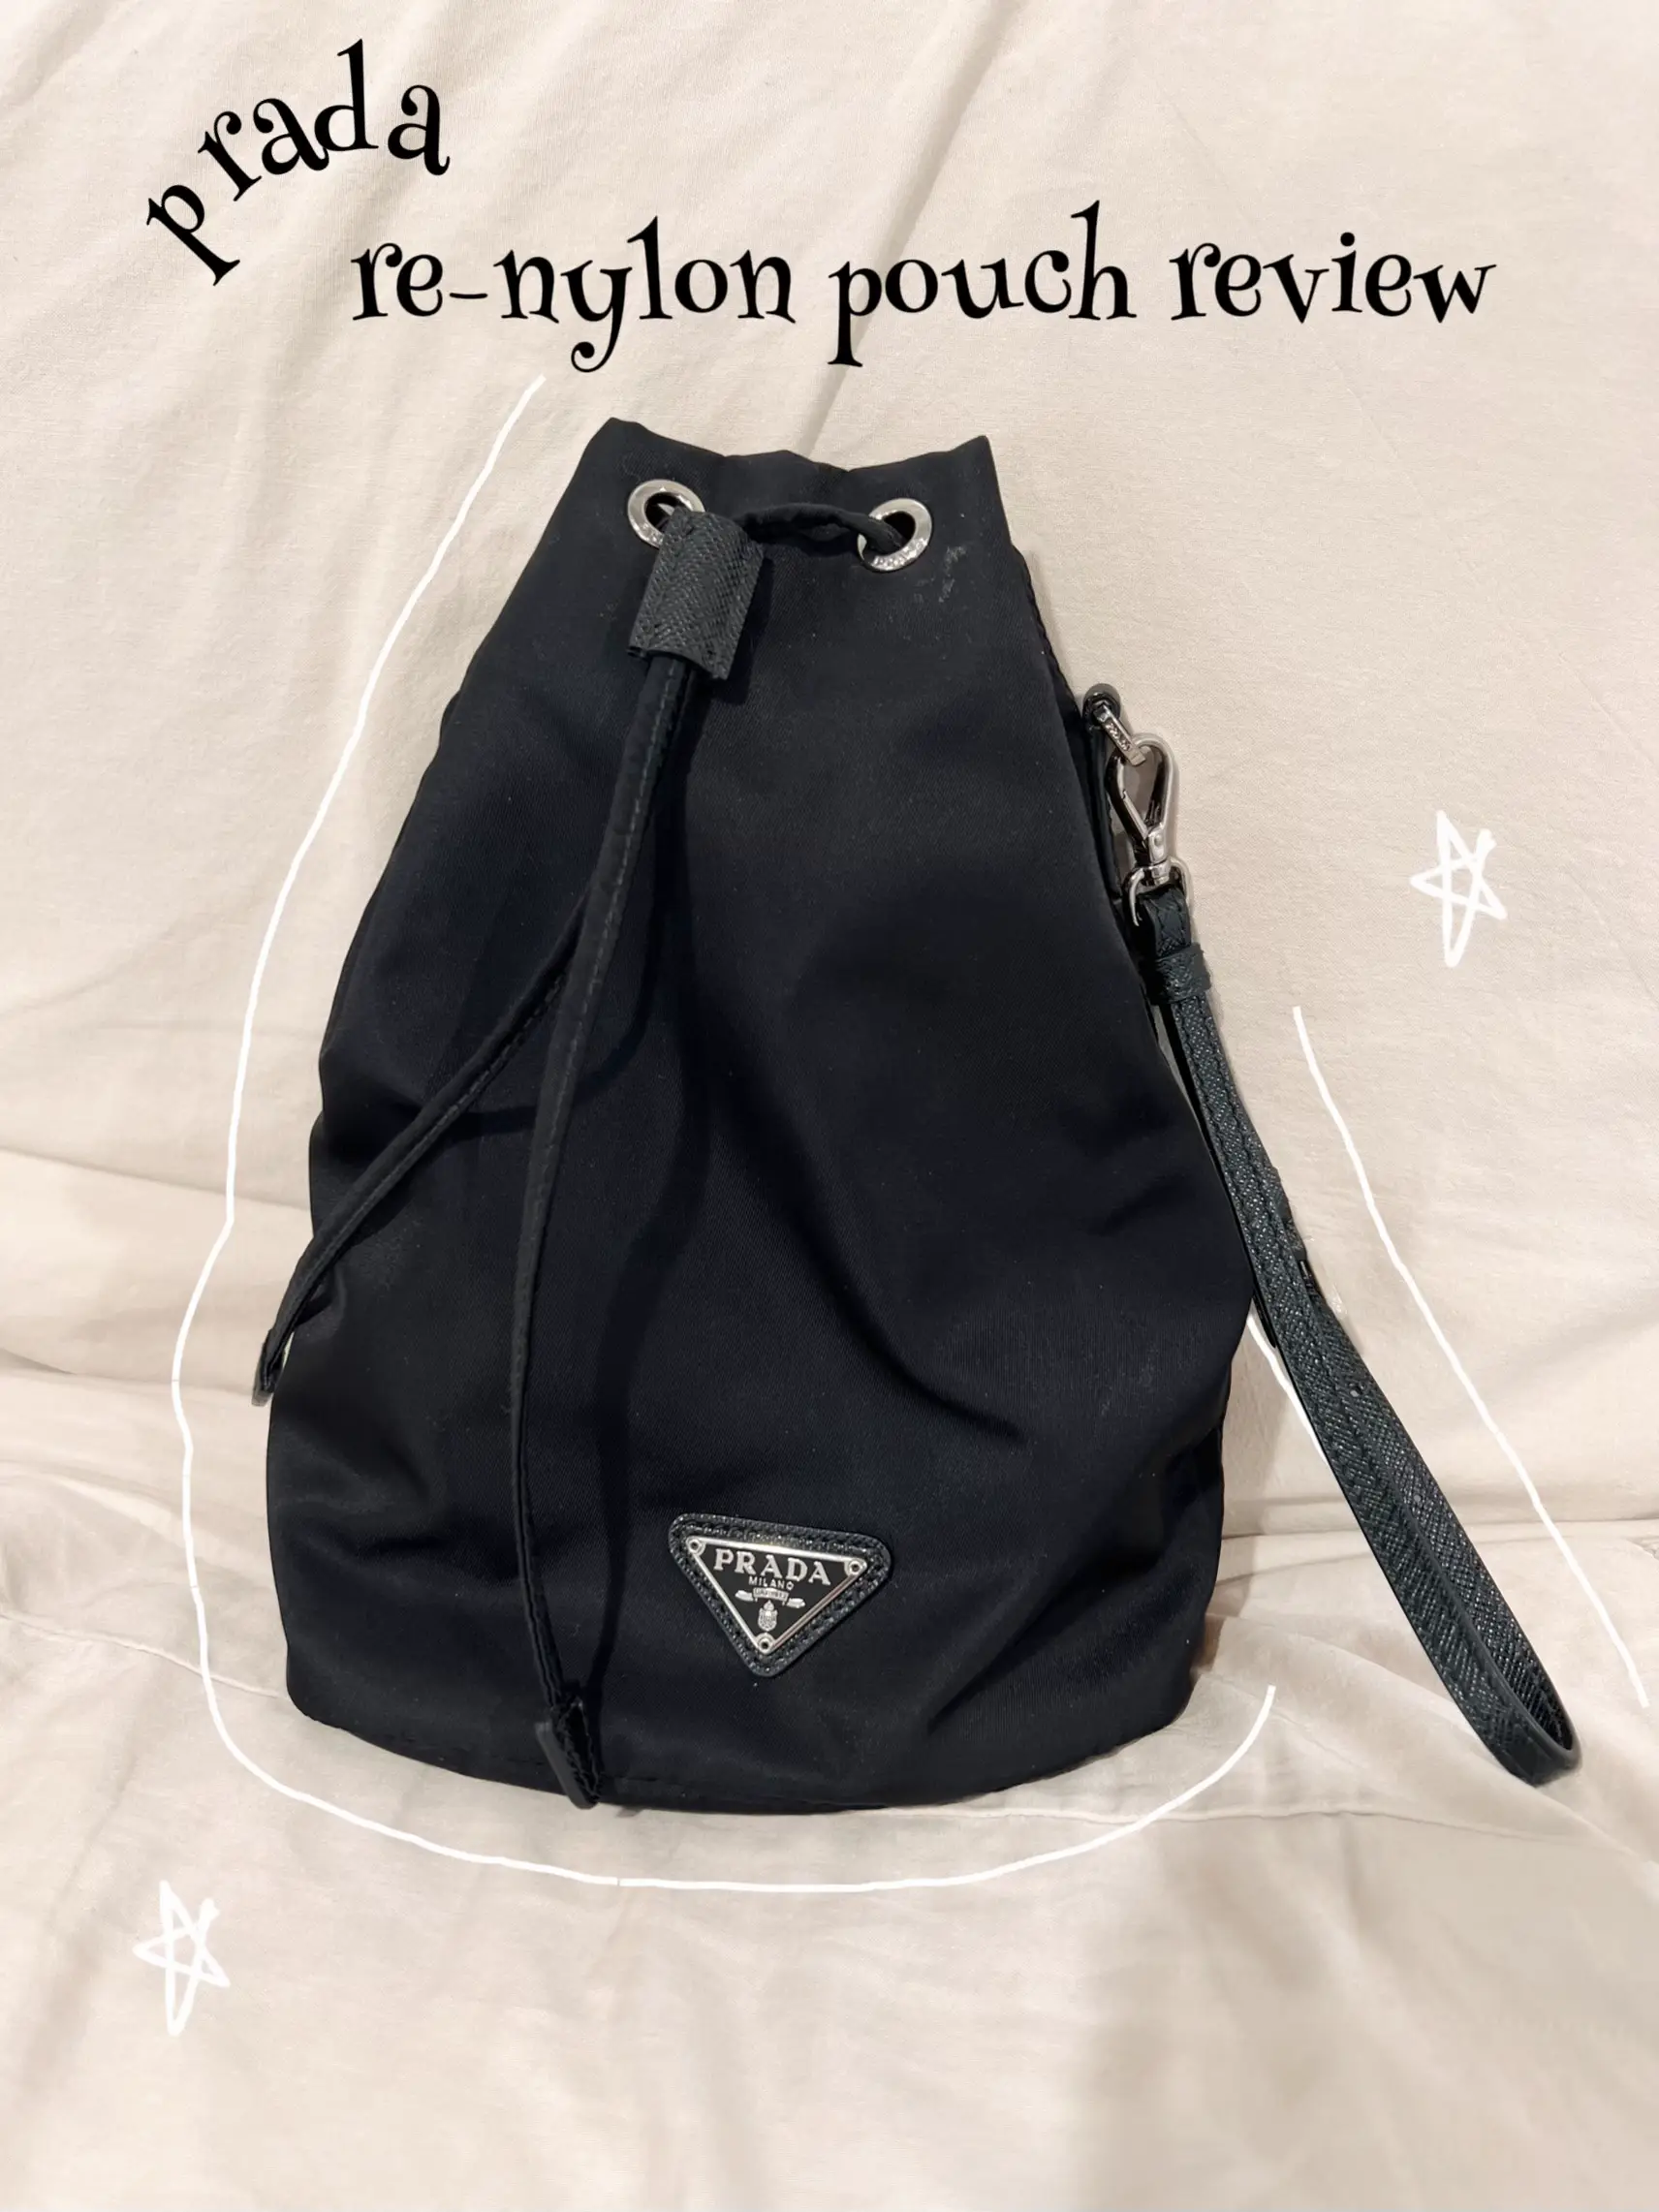 Prada Nylon Pouch Review: Why We Love It